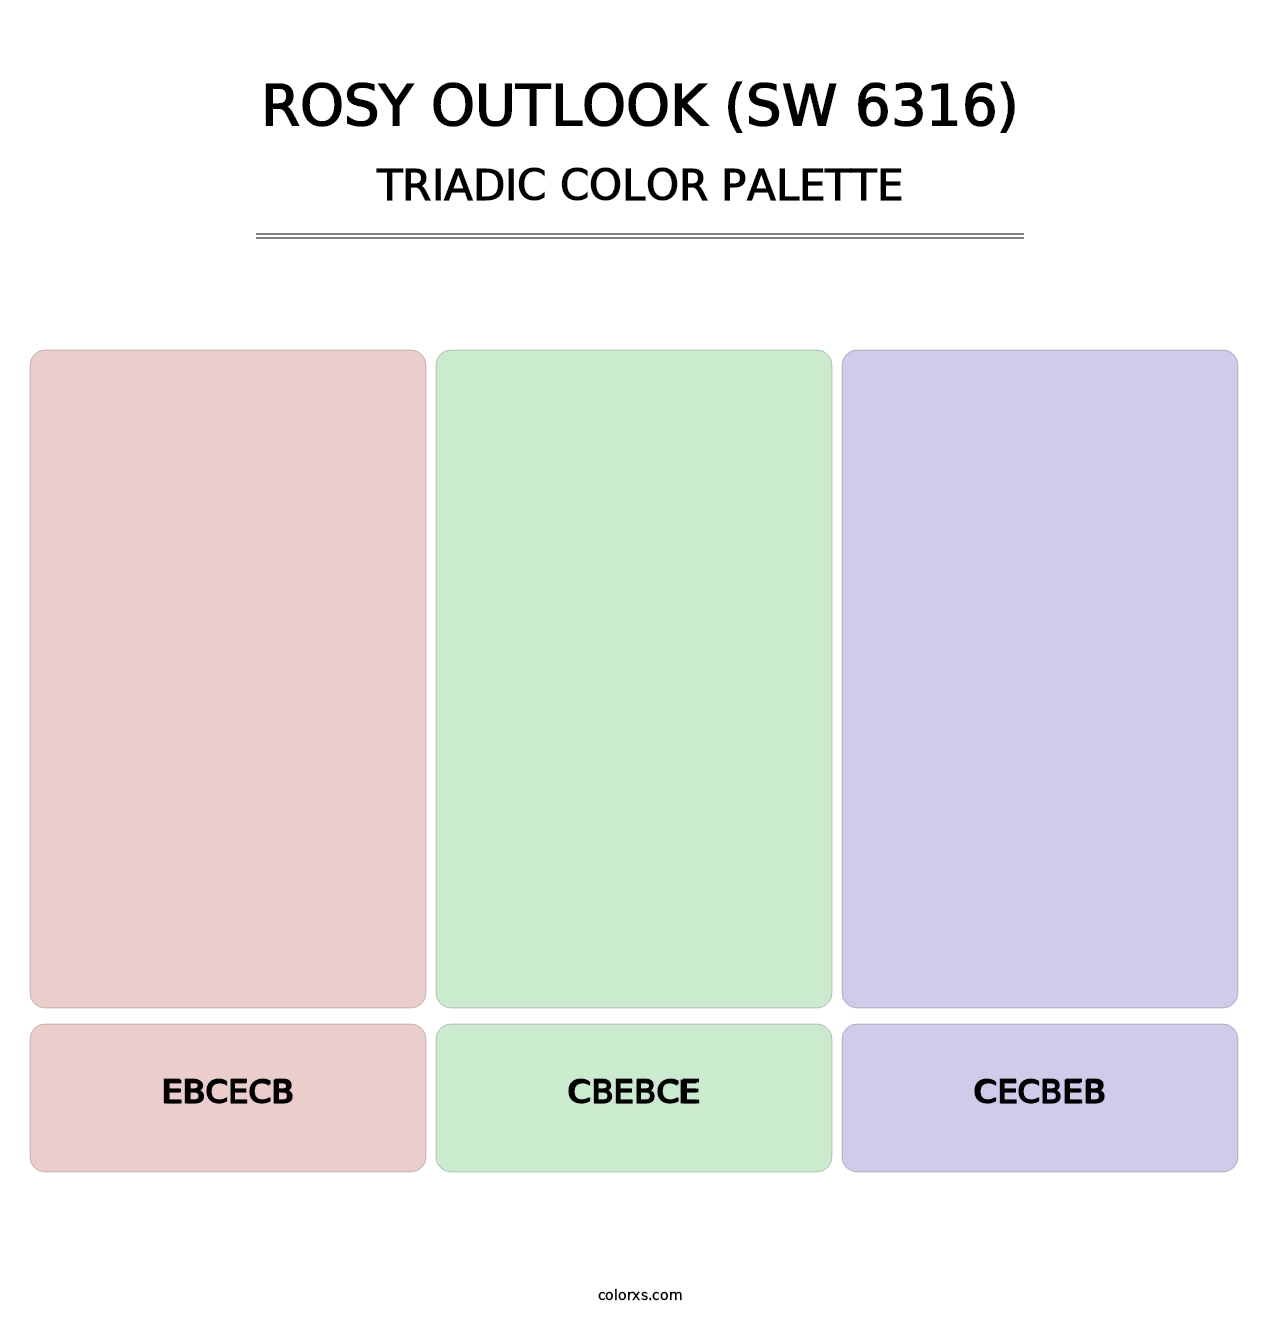 Rosy Outlook (SW 6316) - Triadic Color Palette